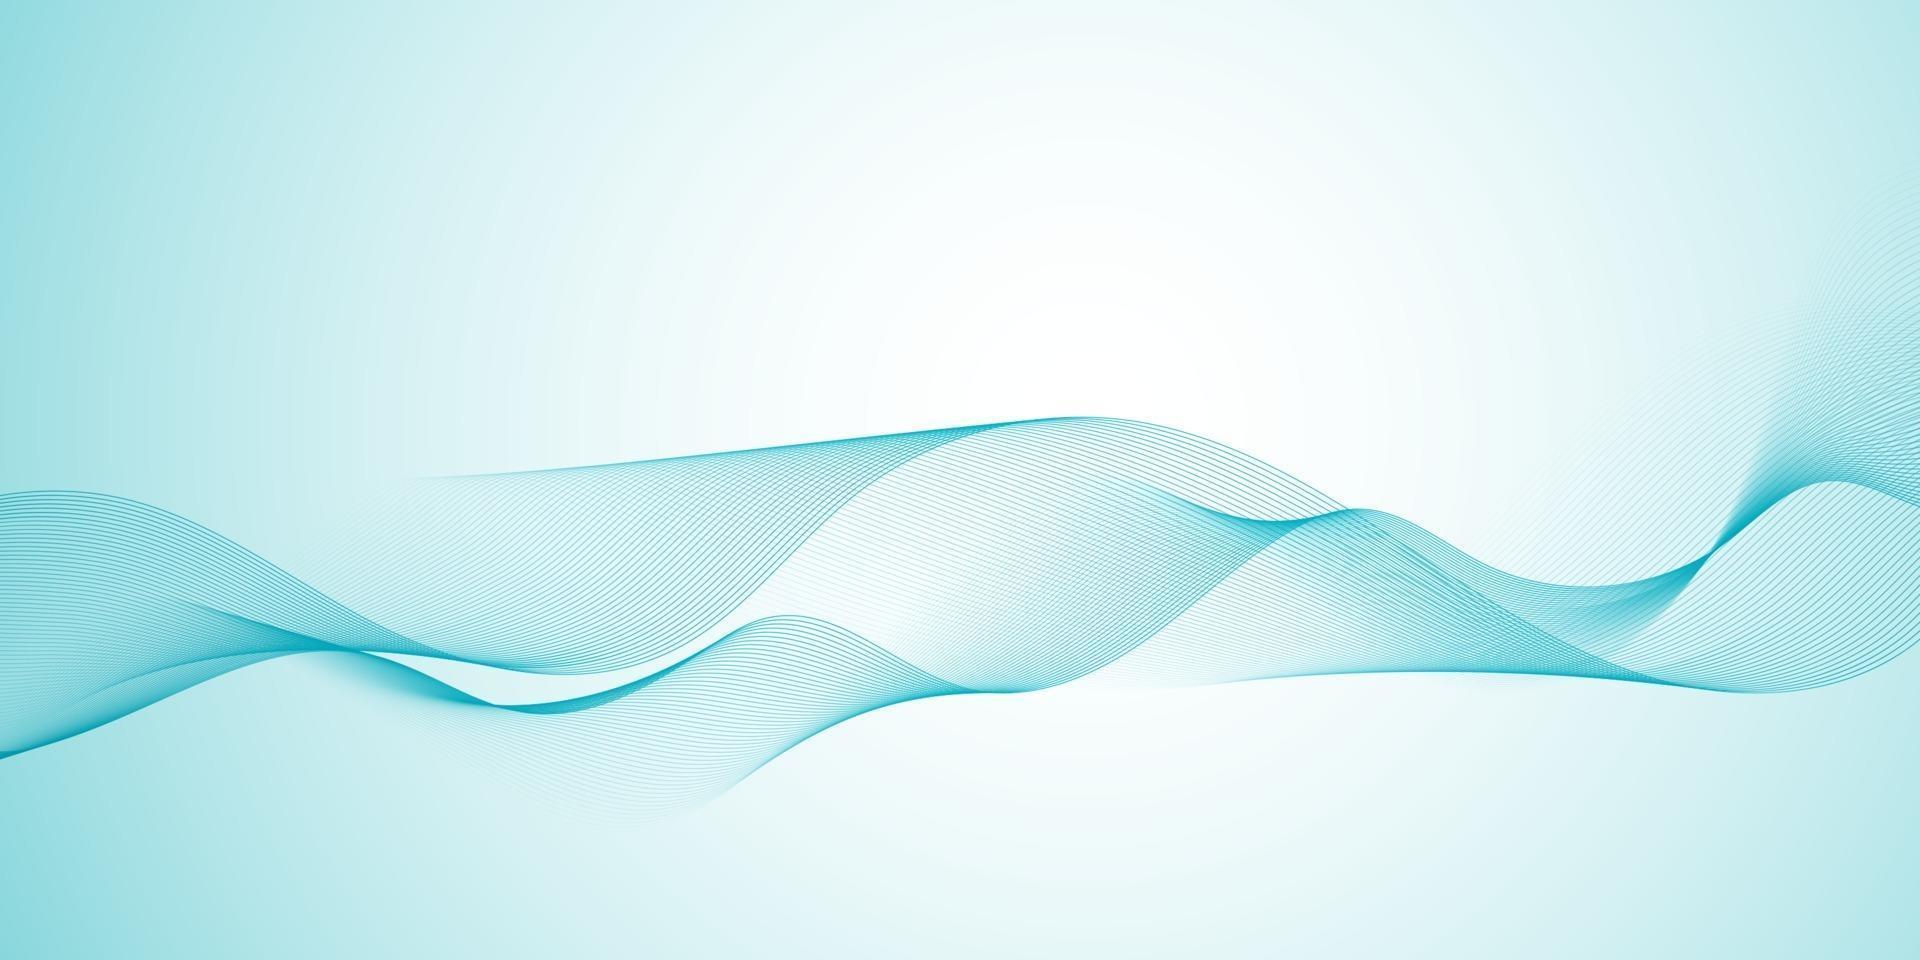 Modern banner with a flowing waves design vector